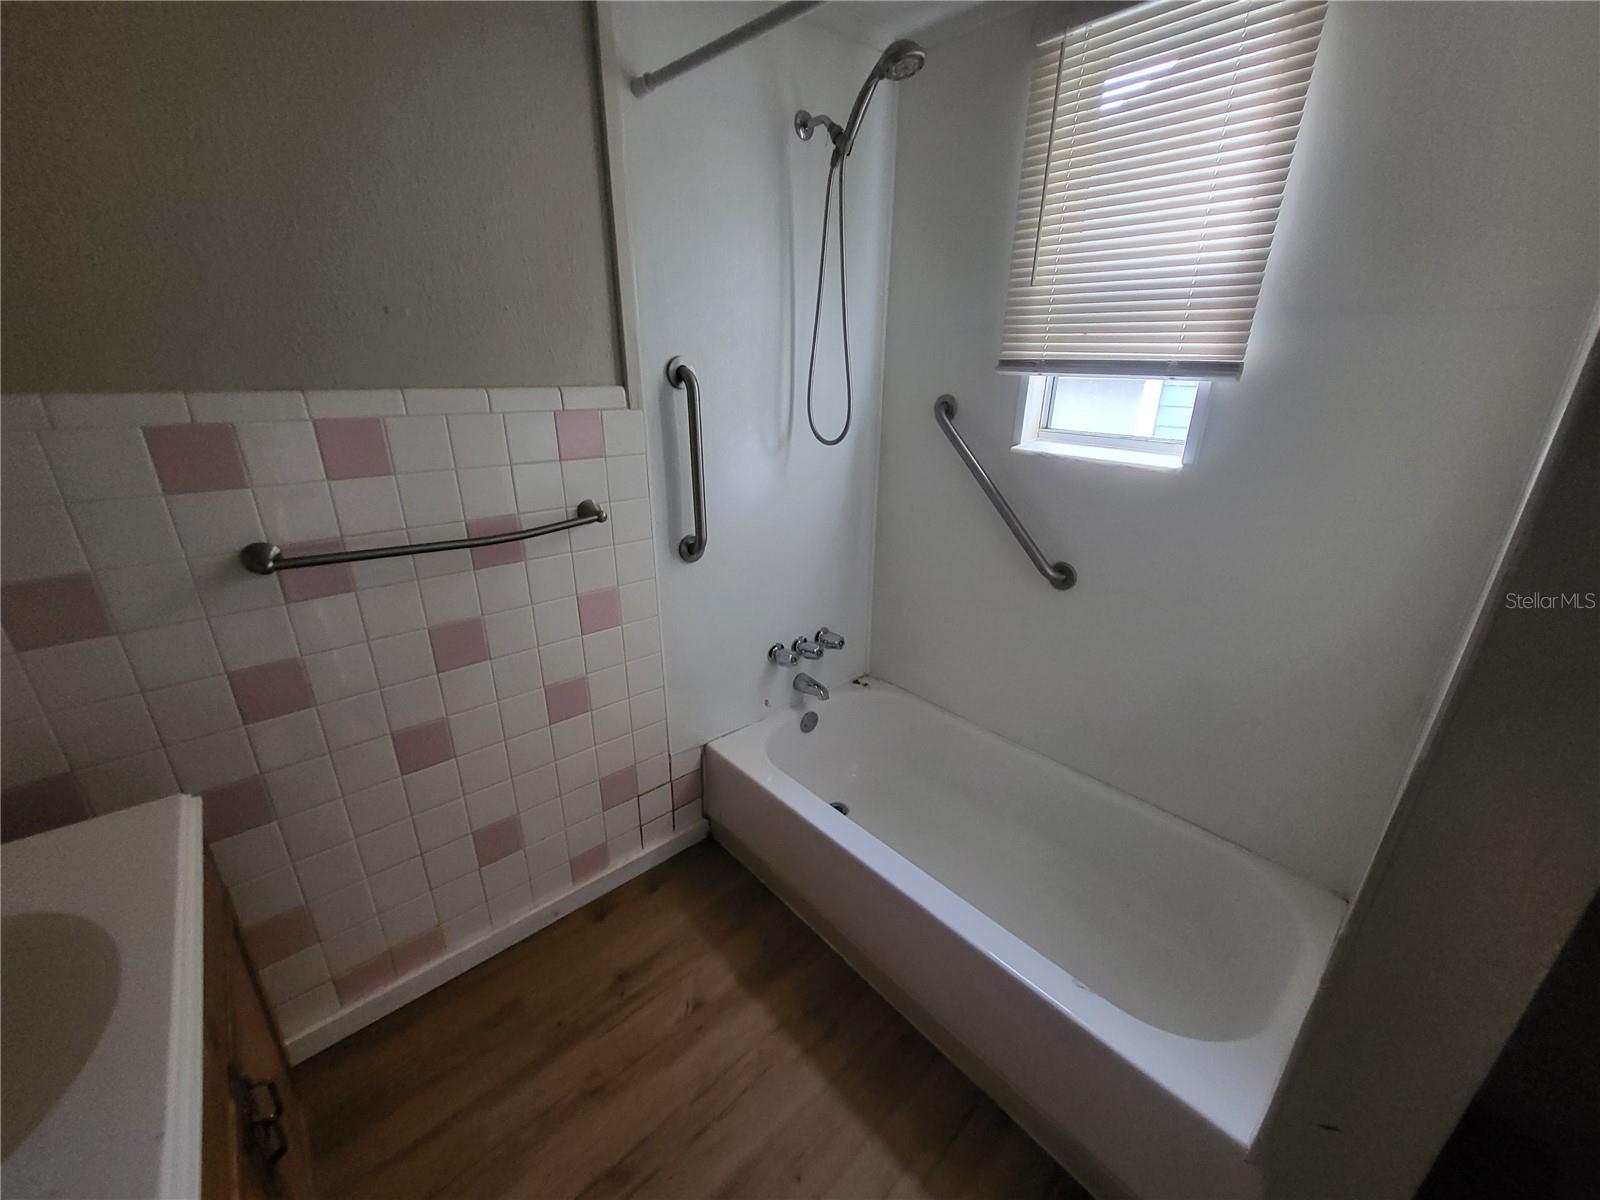 Bathroom has a tub/shower combo and natural light.  Two narrow shelves to the right of the shower for storing linens etc